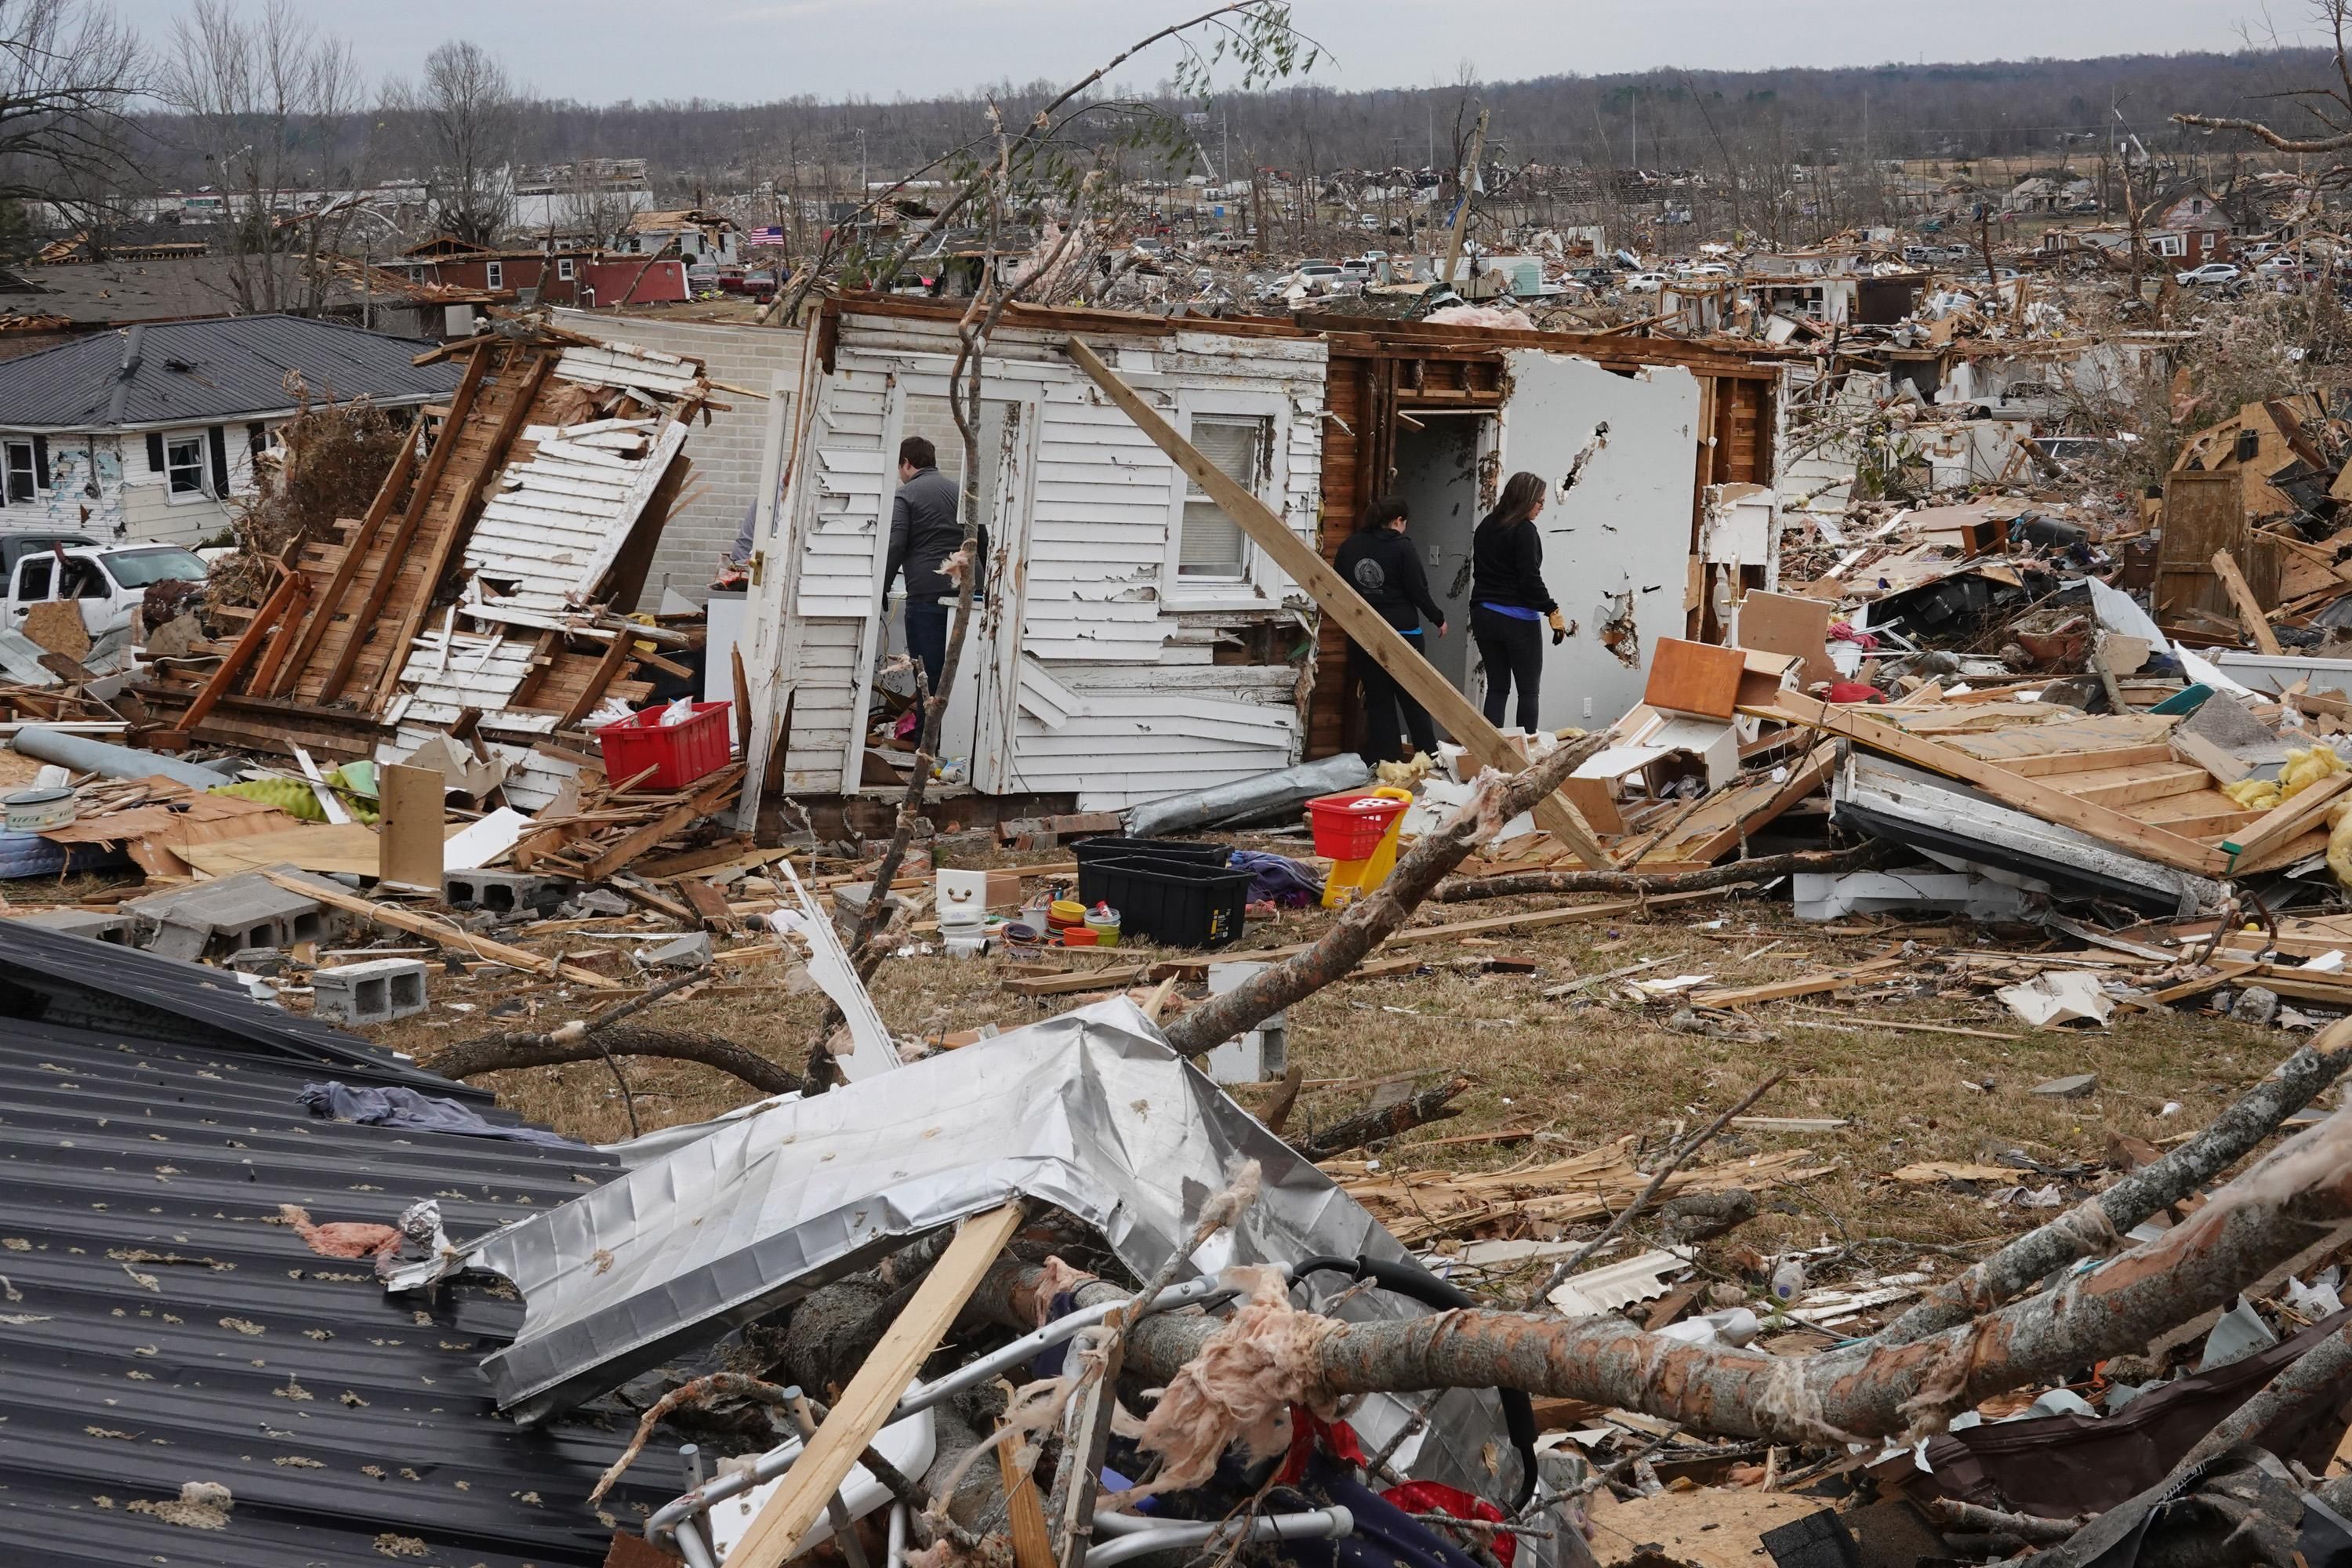 Residents search among the debris of a home after it was destroyed from Friday's tornado on December 15, 2021 in Dawson Springs, Kentucky.